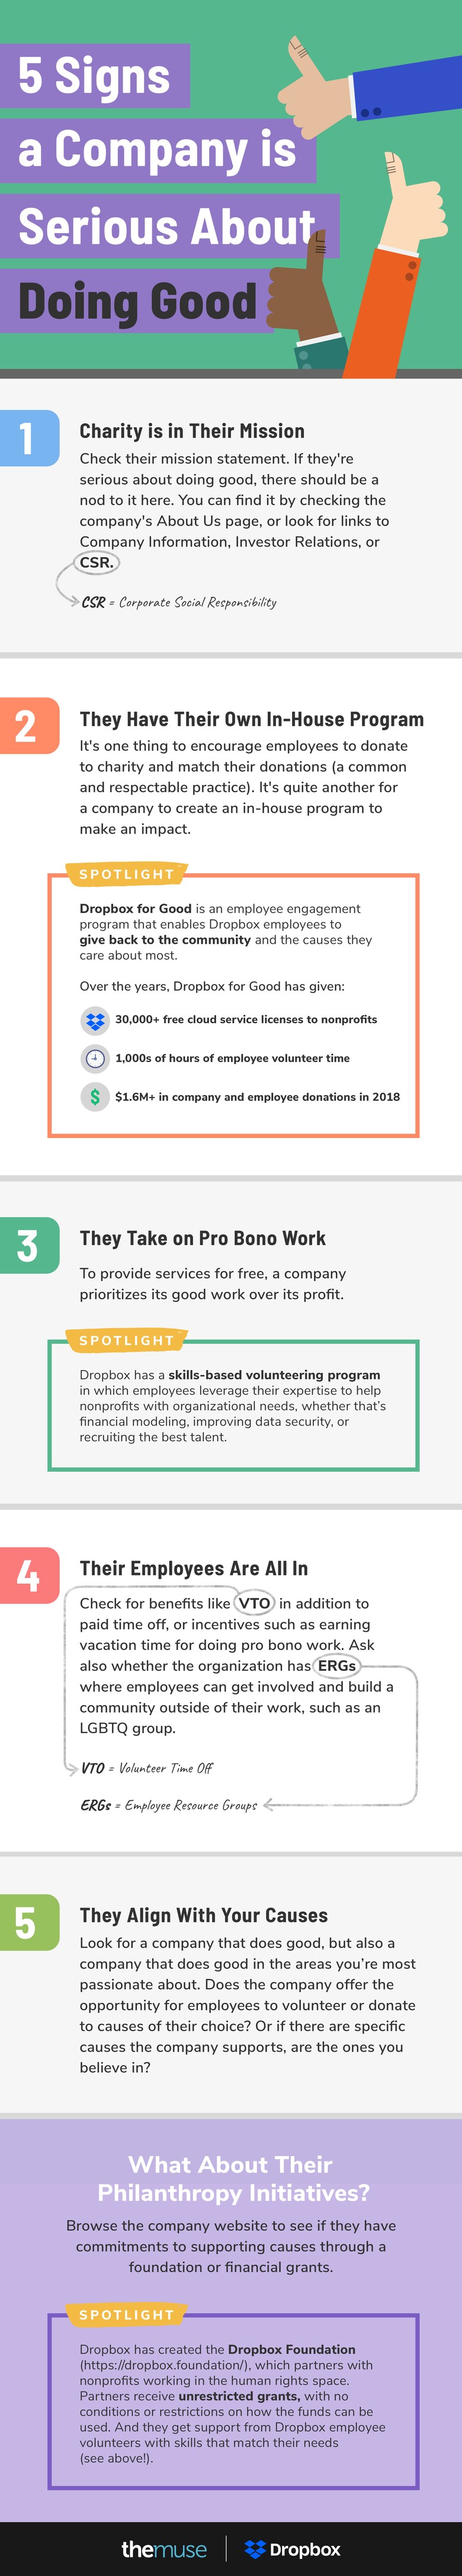 infographic explaining 5 signs that a company cares about doing good: 1. Charity is in their mission. 2. They have their own in-house program. 3. They do pro bono work. 4. Their employees are all in. 5. Their causes align with yours.